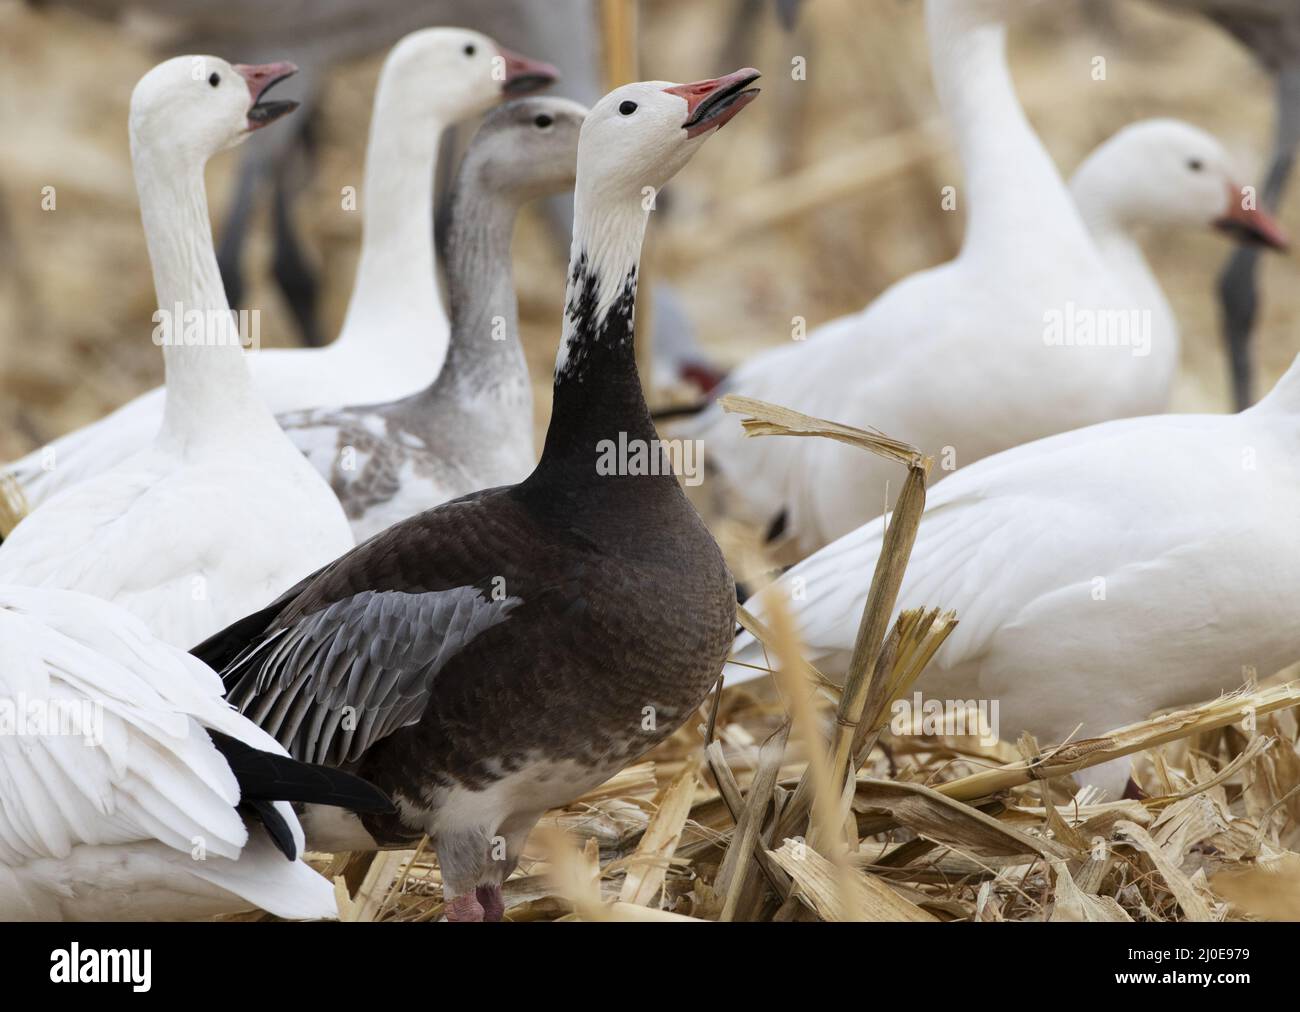 Adult blue morph snow goose in New Mexico corn field with white morph snow geese lifts head and calls Stock Photo